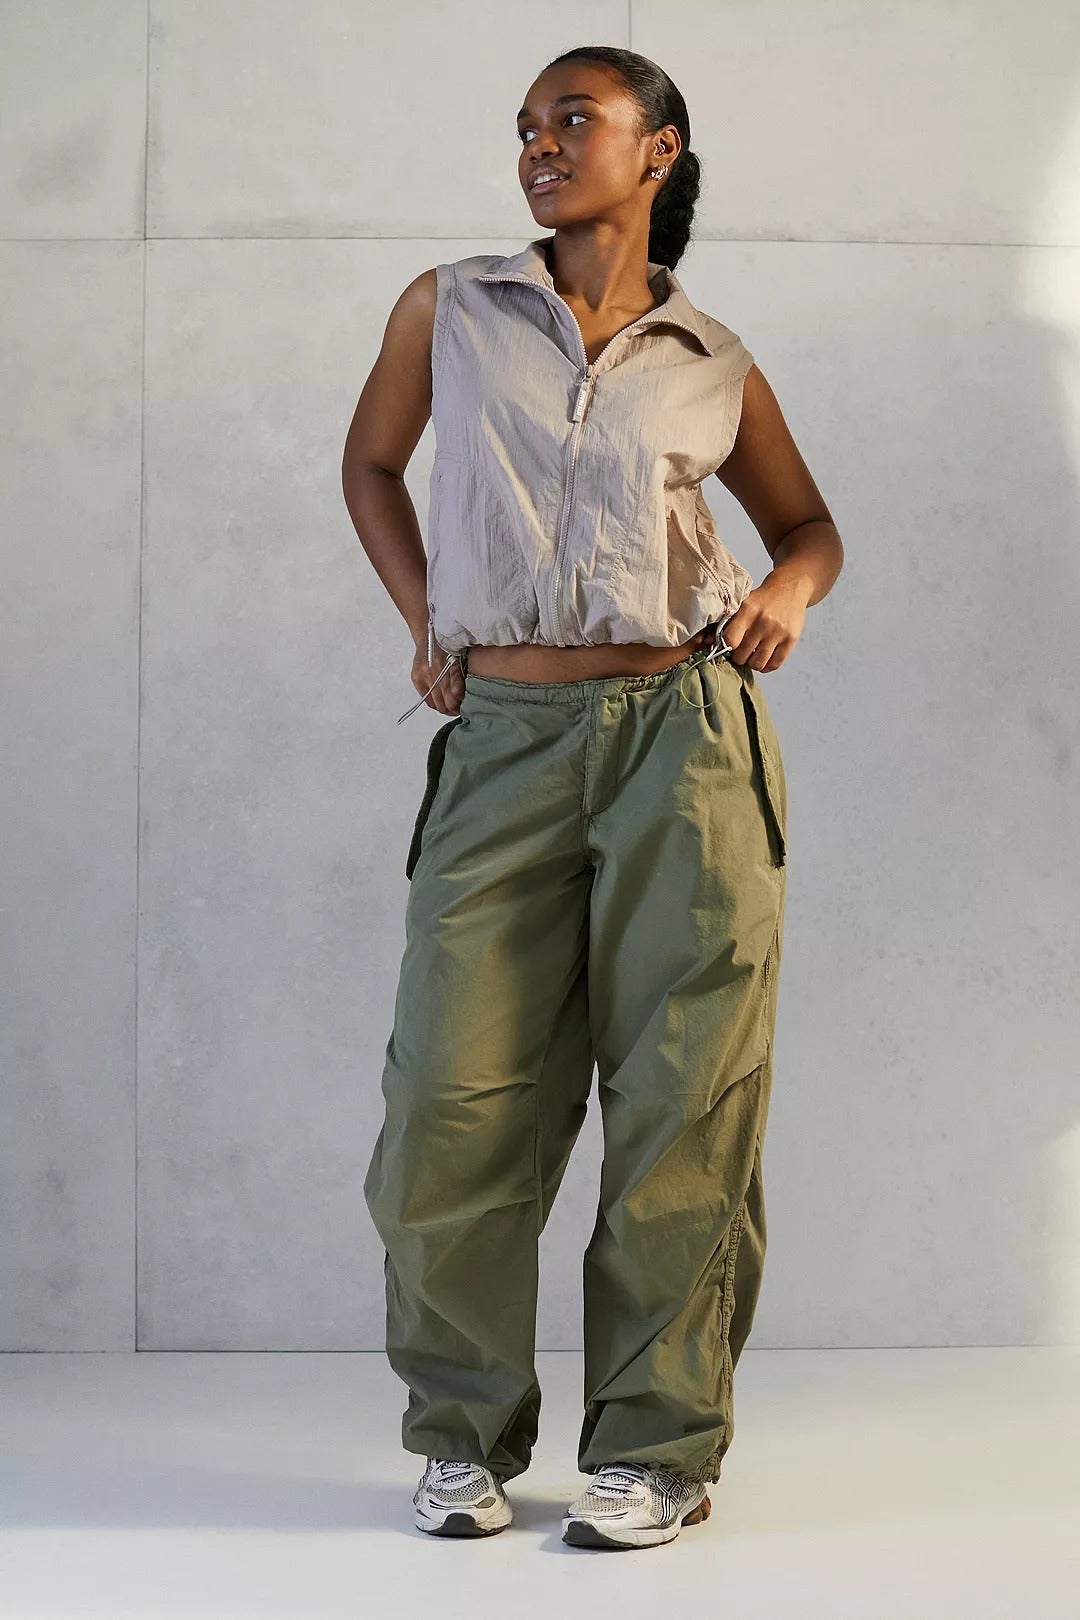 7 Cargo Pants Outfits To Wear Without Looking Sloppy